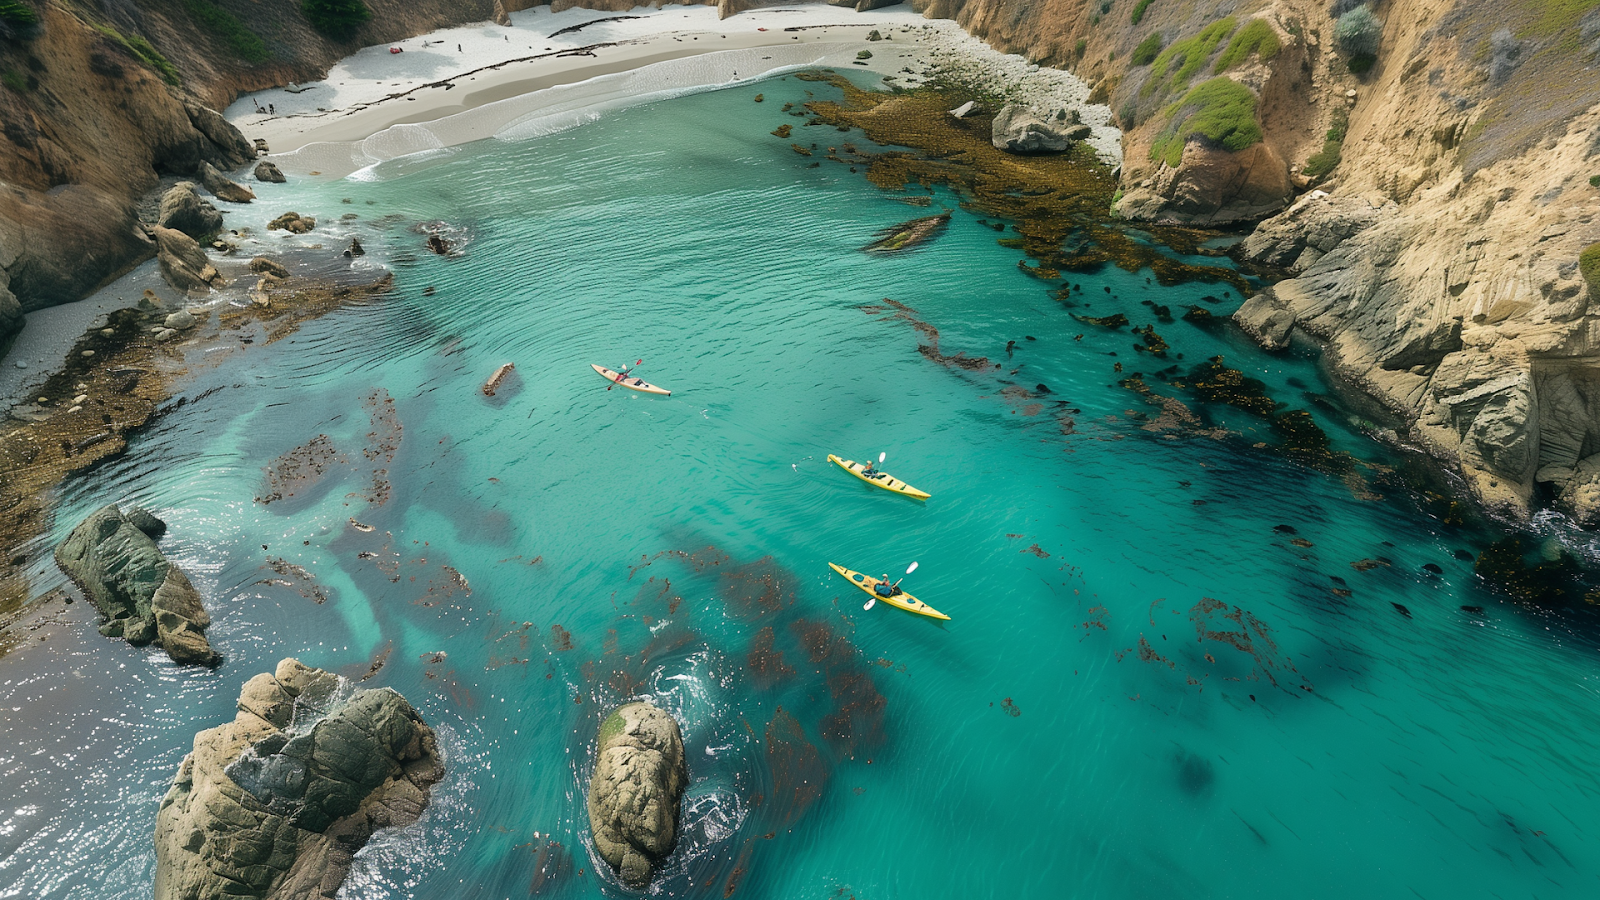 Kayakers exploring a hidden cove in Big Sur, viewed from above, showcasing the stunning contrast of turquoise waters against rugged cliffs.